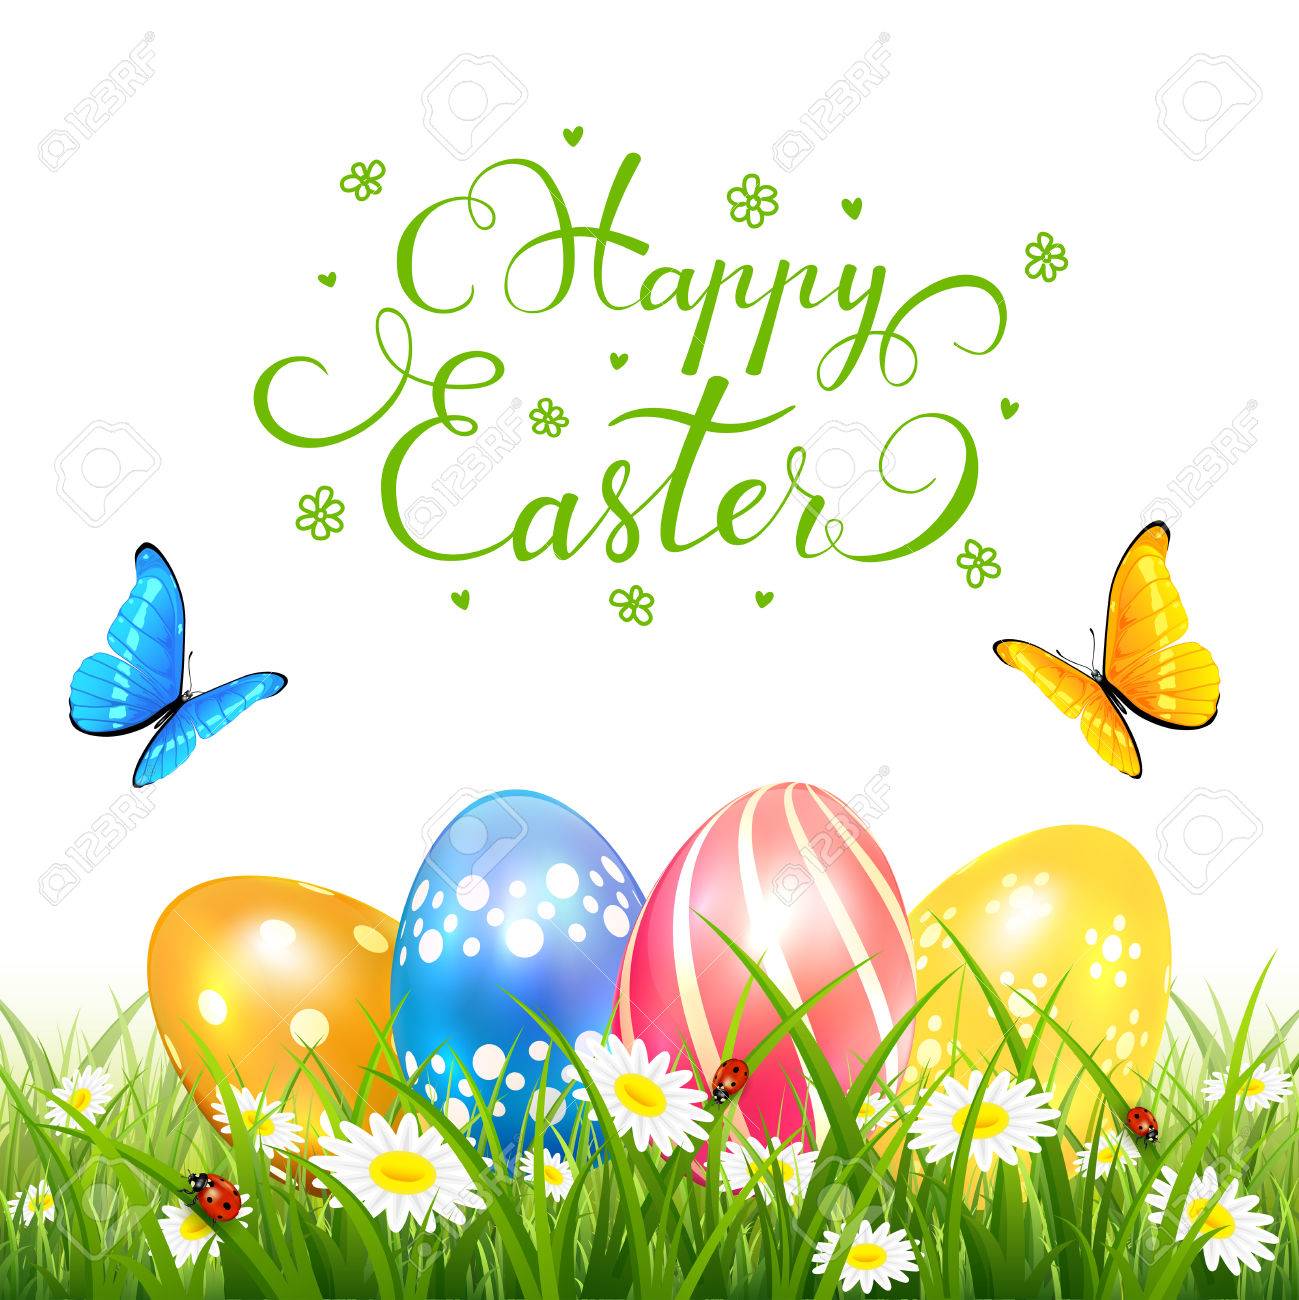 Abstract Nature Background With Colored Easter Eggs In Grass And